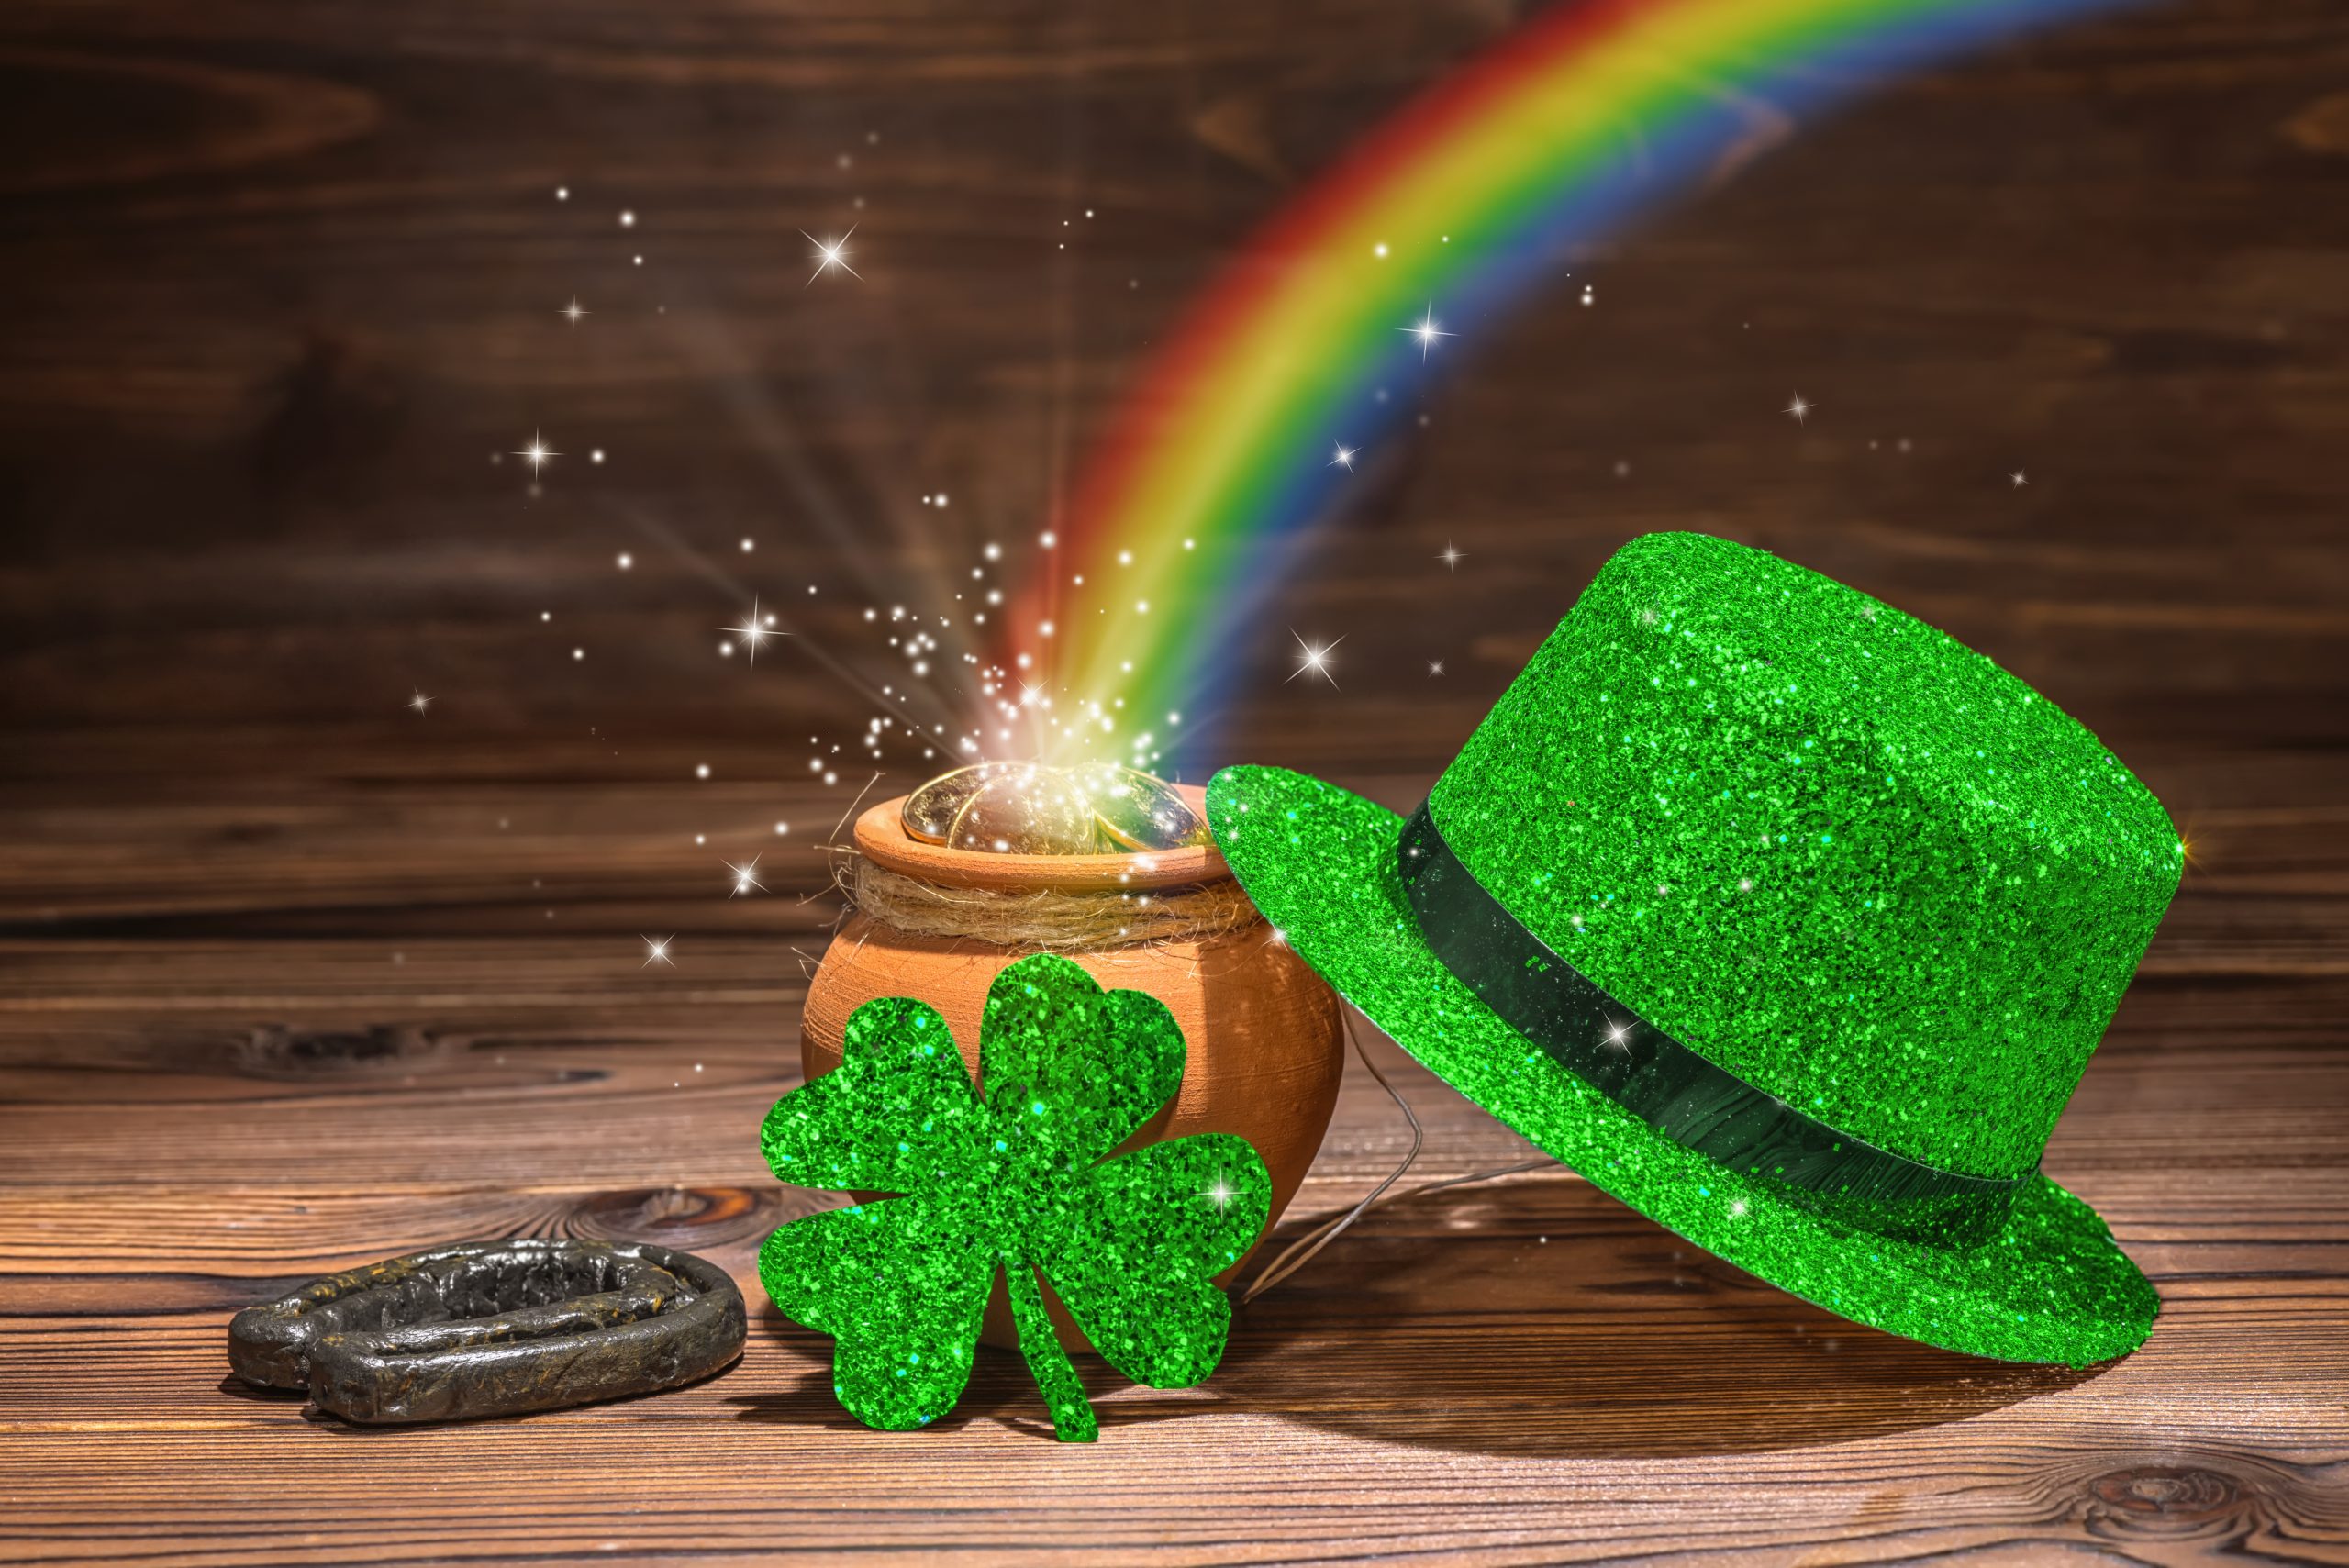 The Luck of The Irish – Circle K survey shows how lucky we really are